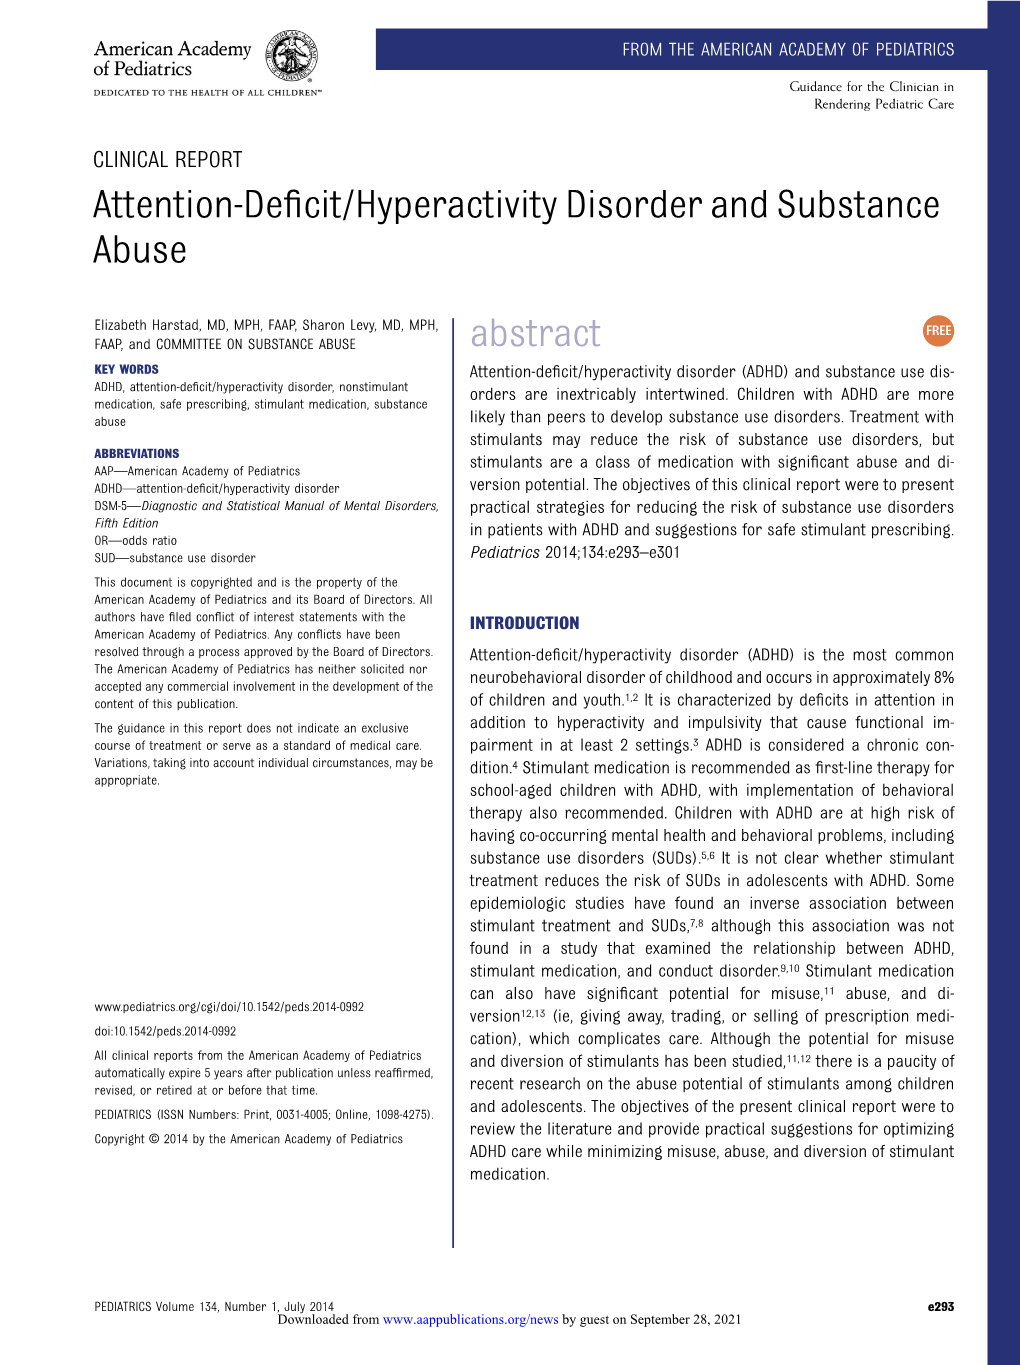 Attention-Deficit/Hyperactivity Disorder and Substance Abuse